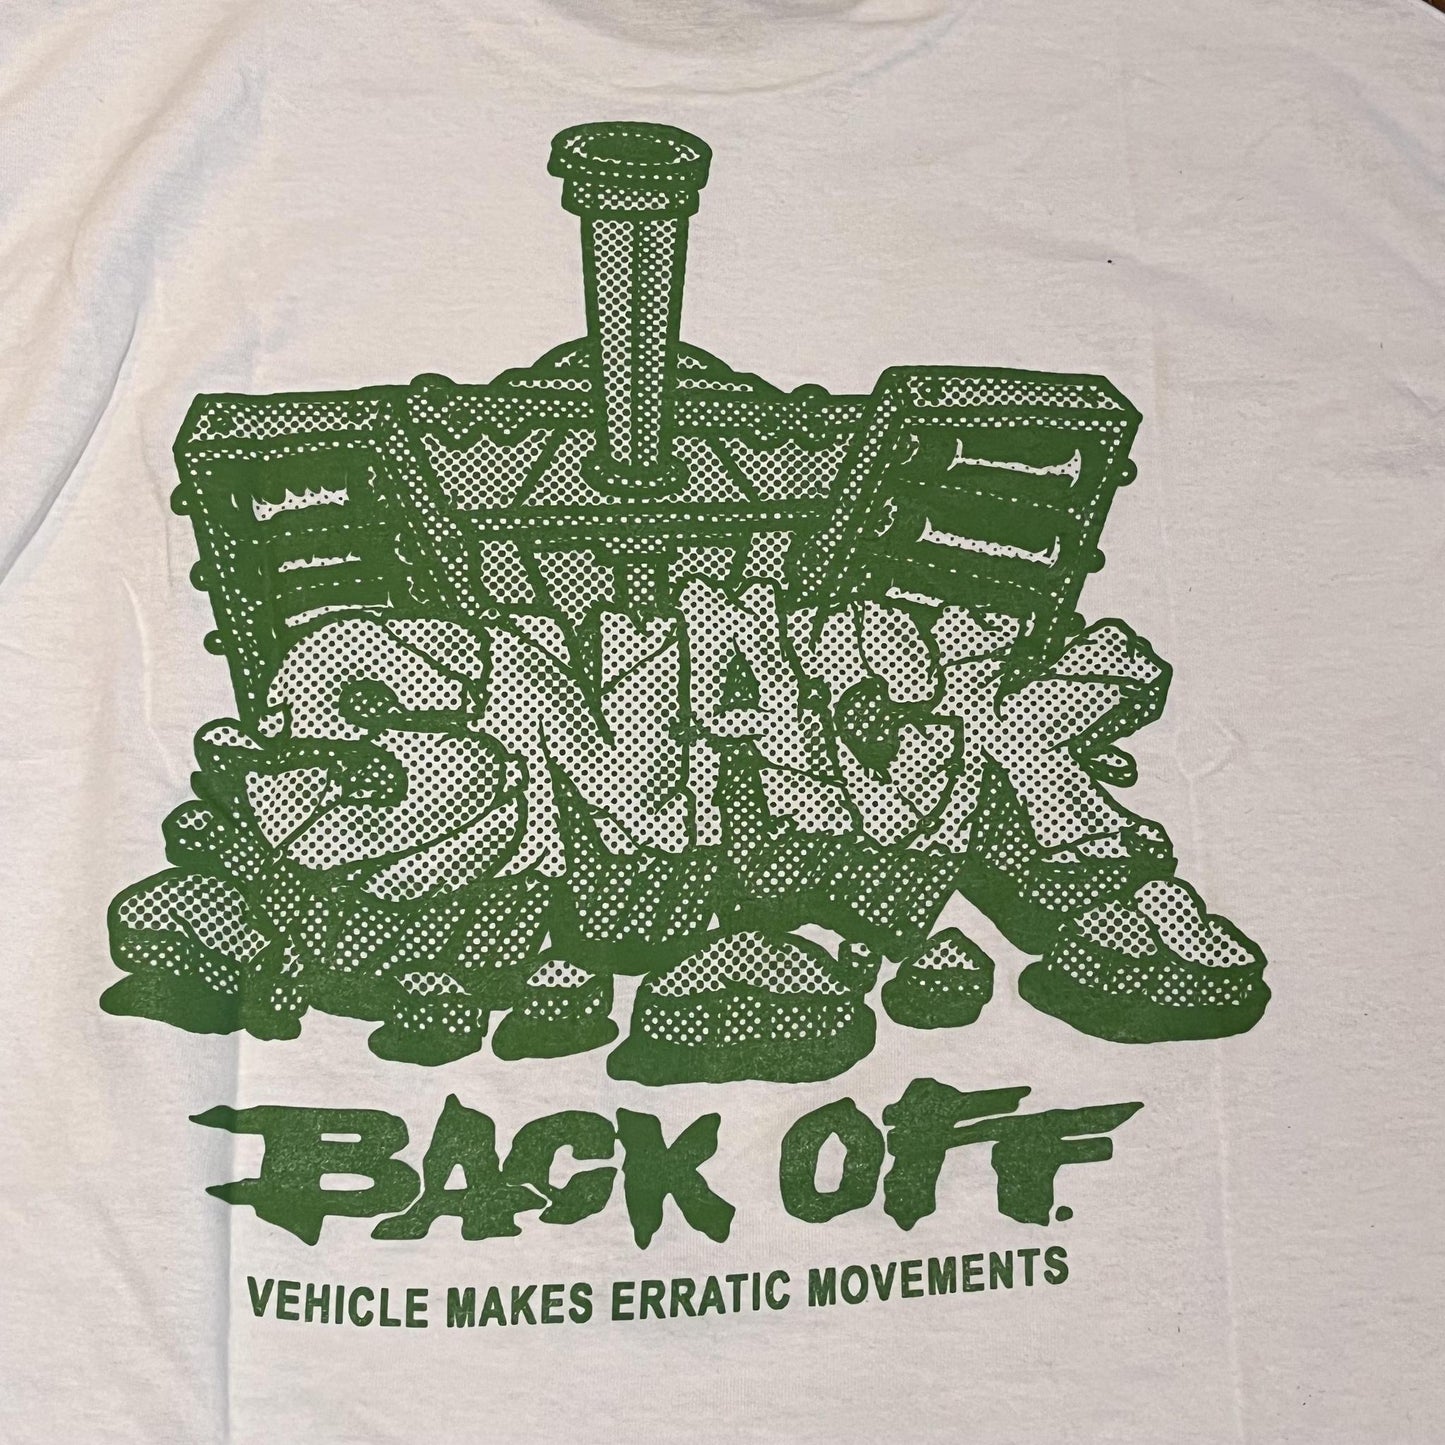 Snack Back Off Tee